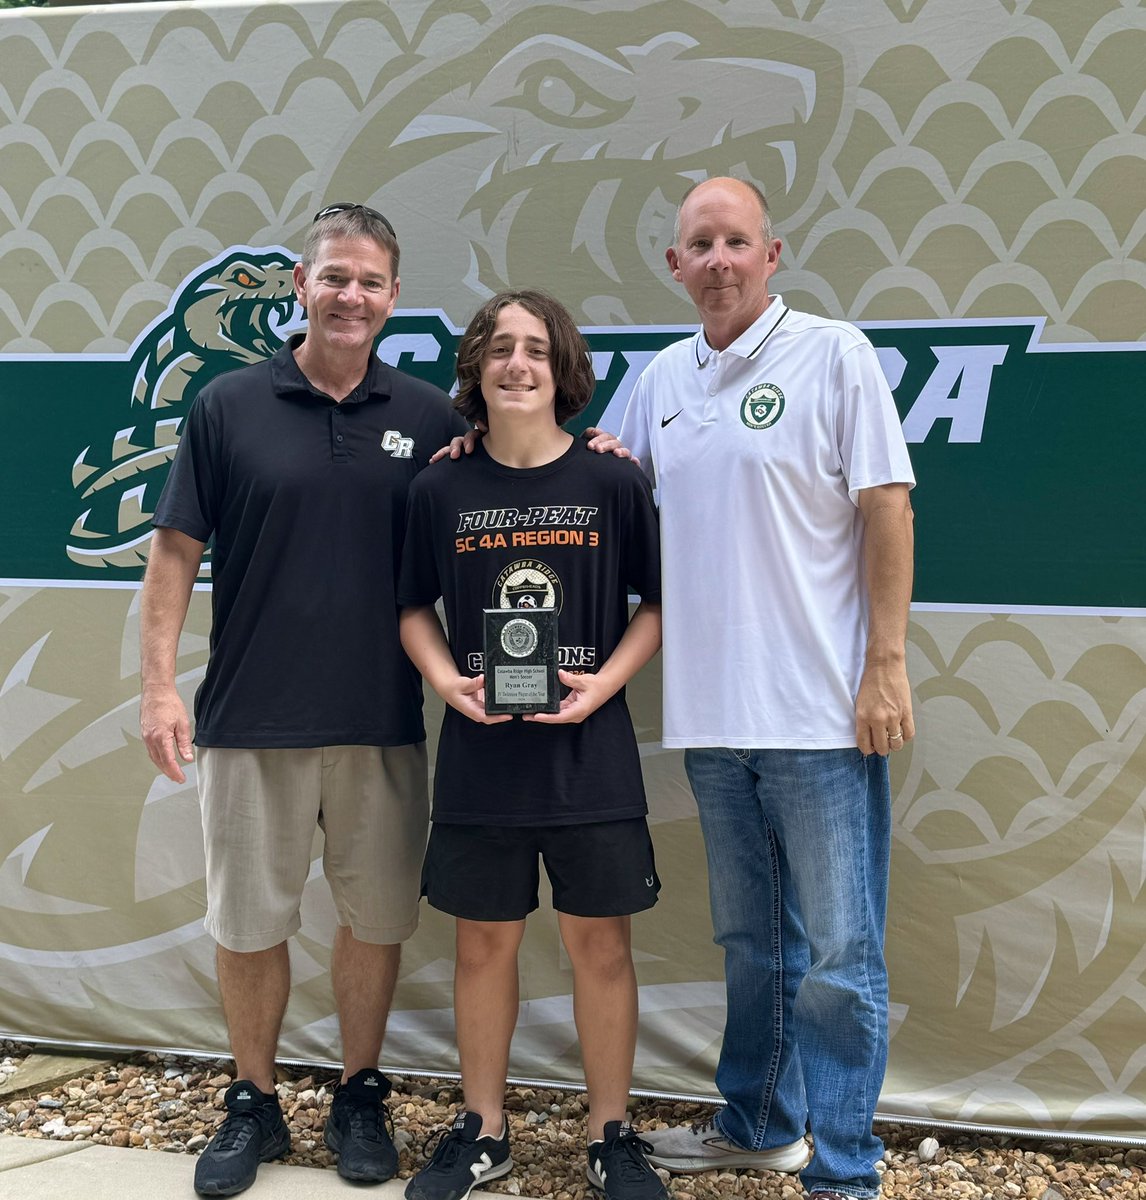 Congratulations Ryan on being named Defensive player of the year for his JV school team @crhsmenssoccer. We are proud of you.Thank you for representing us well.❤️⚽️ #OneFamily #AlphaSoccerAcademy